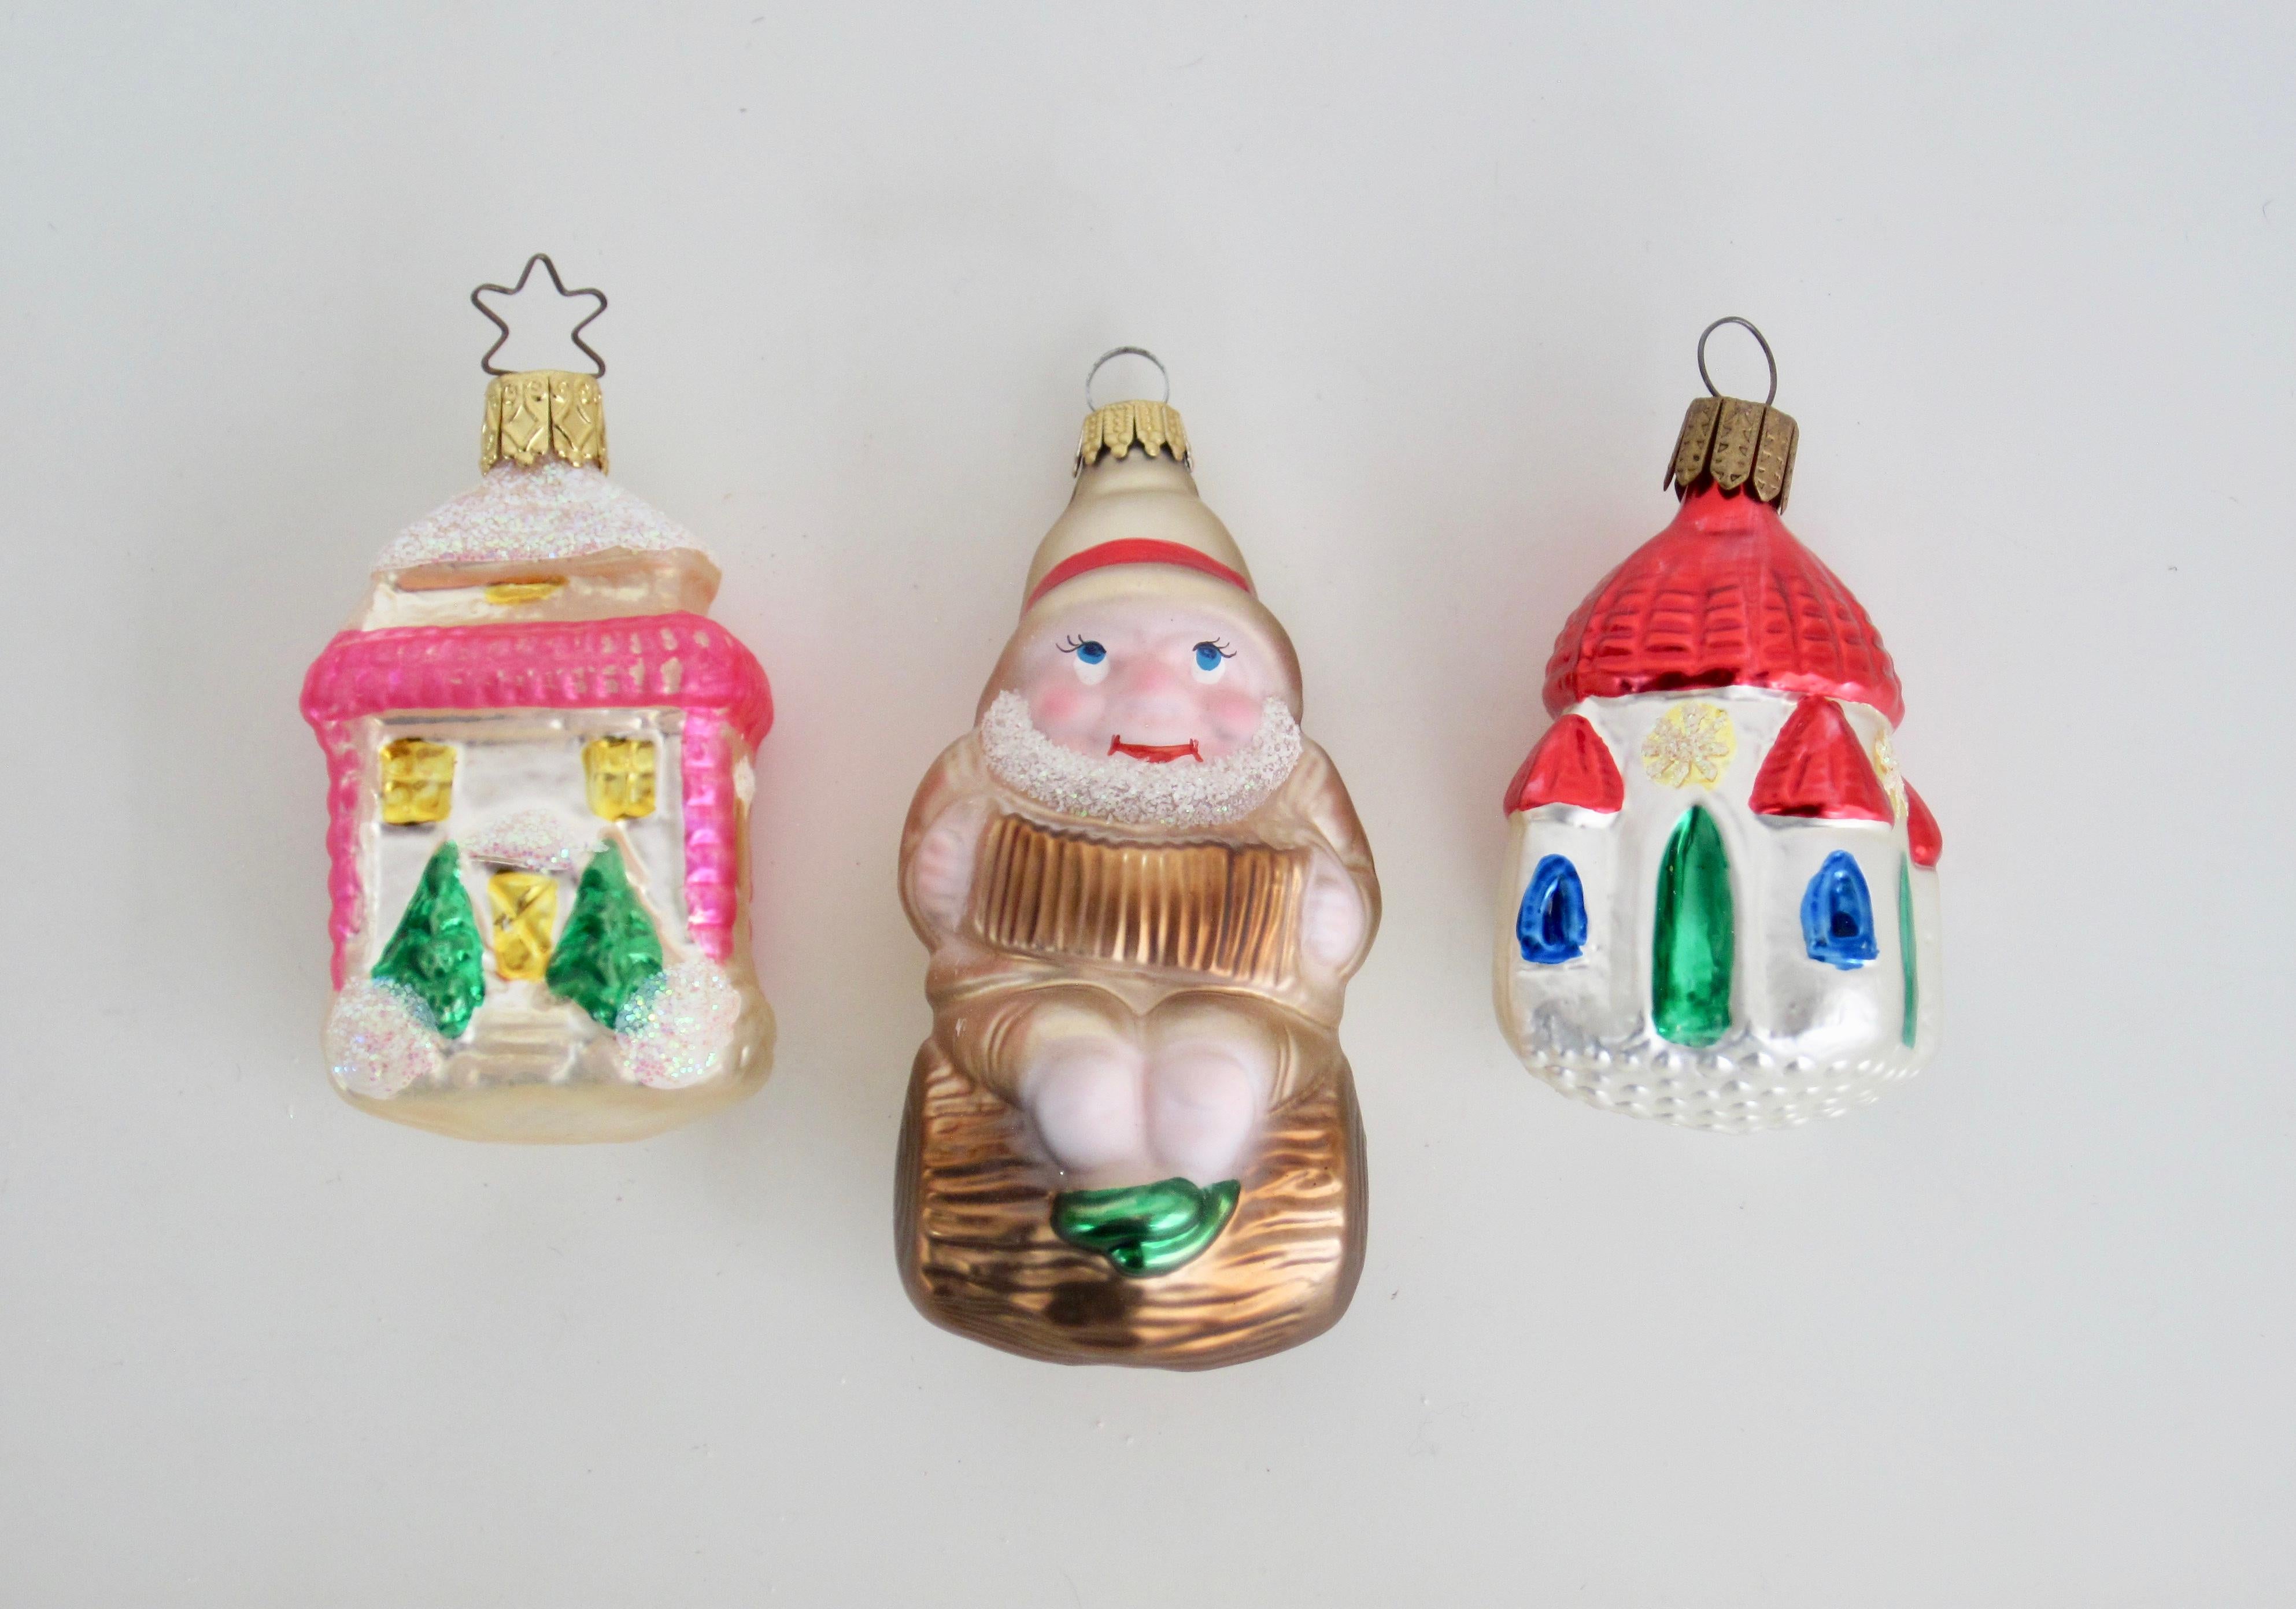 Set of three blown glass Christmas ornament including one charming gnome/dwarf and two houses. Colors are bright. Clean condition as expected for the age.

White, Pink, Gold House Dimensions: 1.25